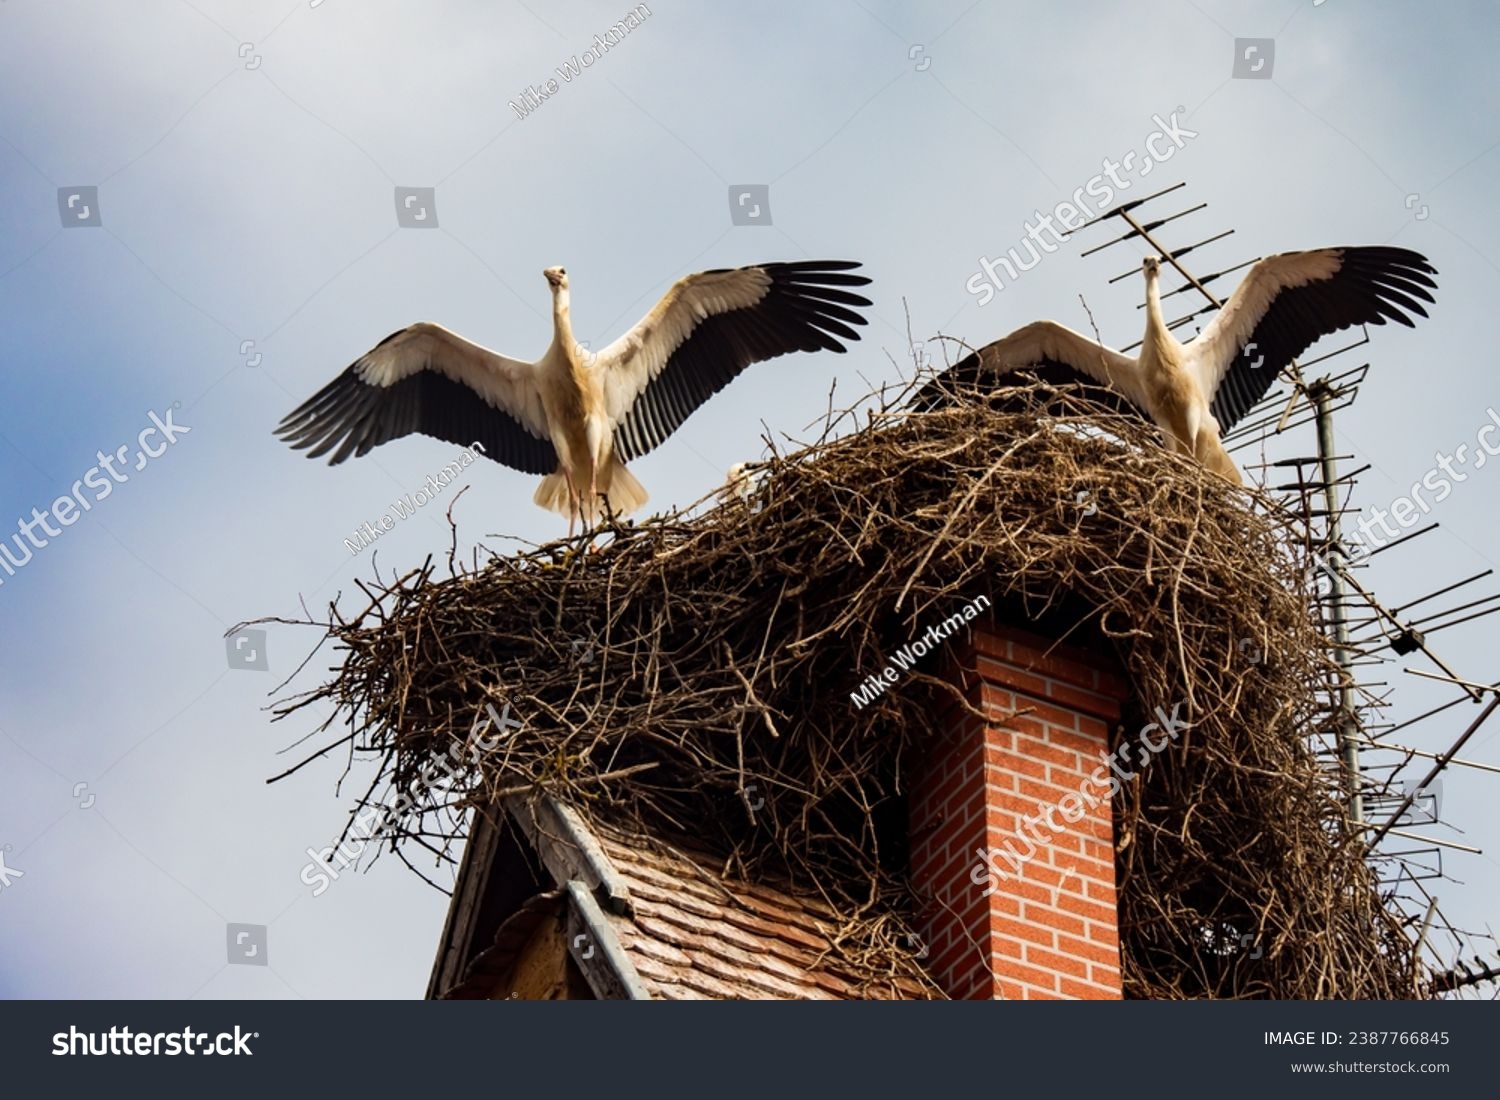 Storks nesting on the roof of Alsace village in France #2387766845